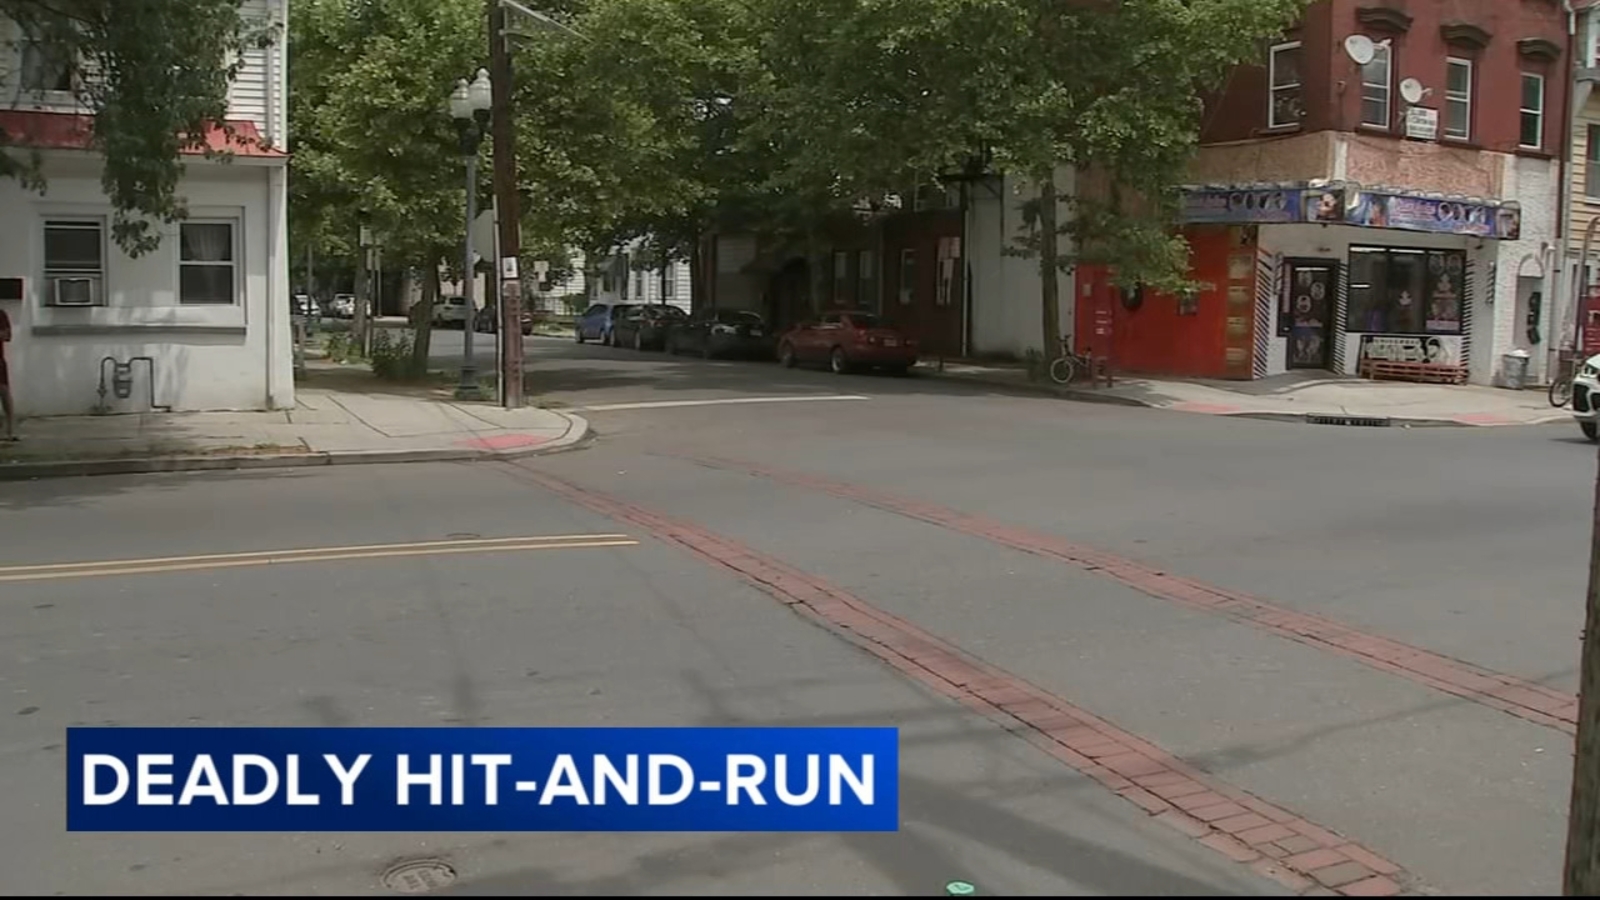  Hit-and-run in Trenton, New Jersey leaves woman dead 